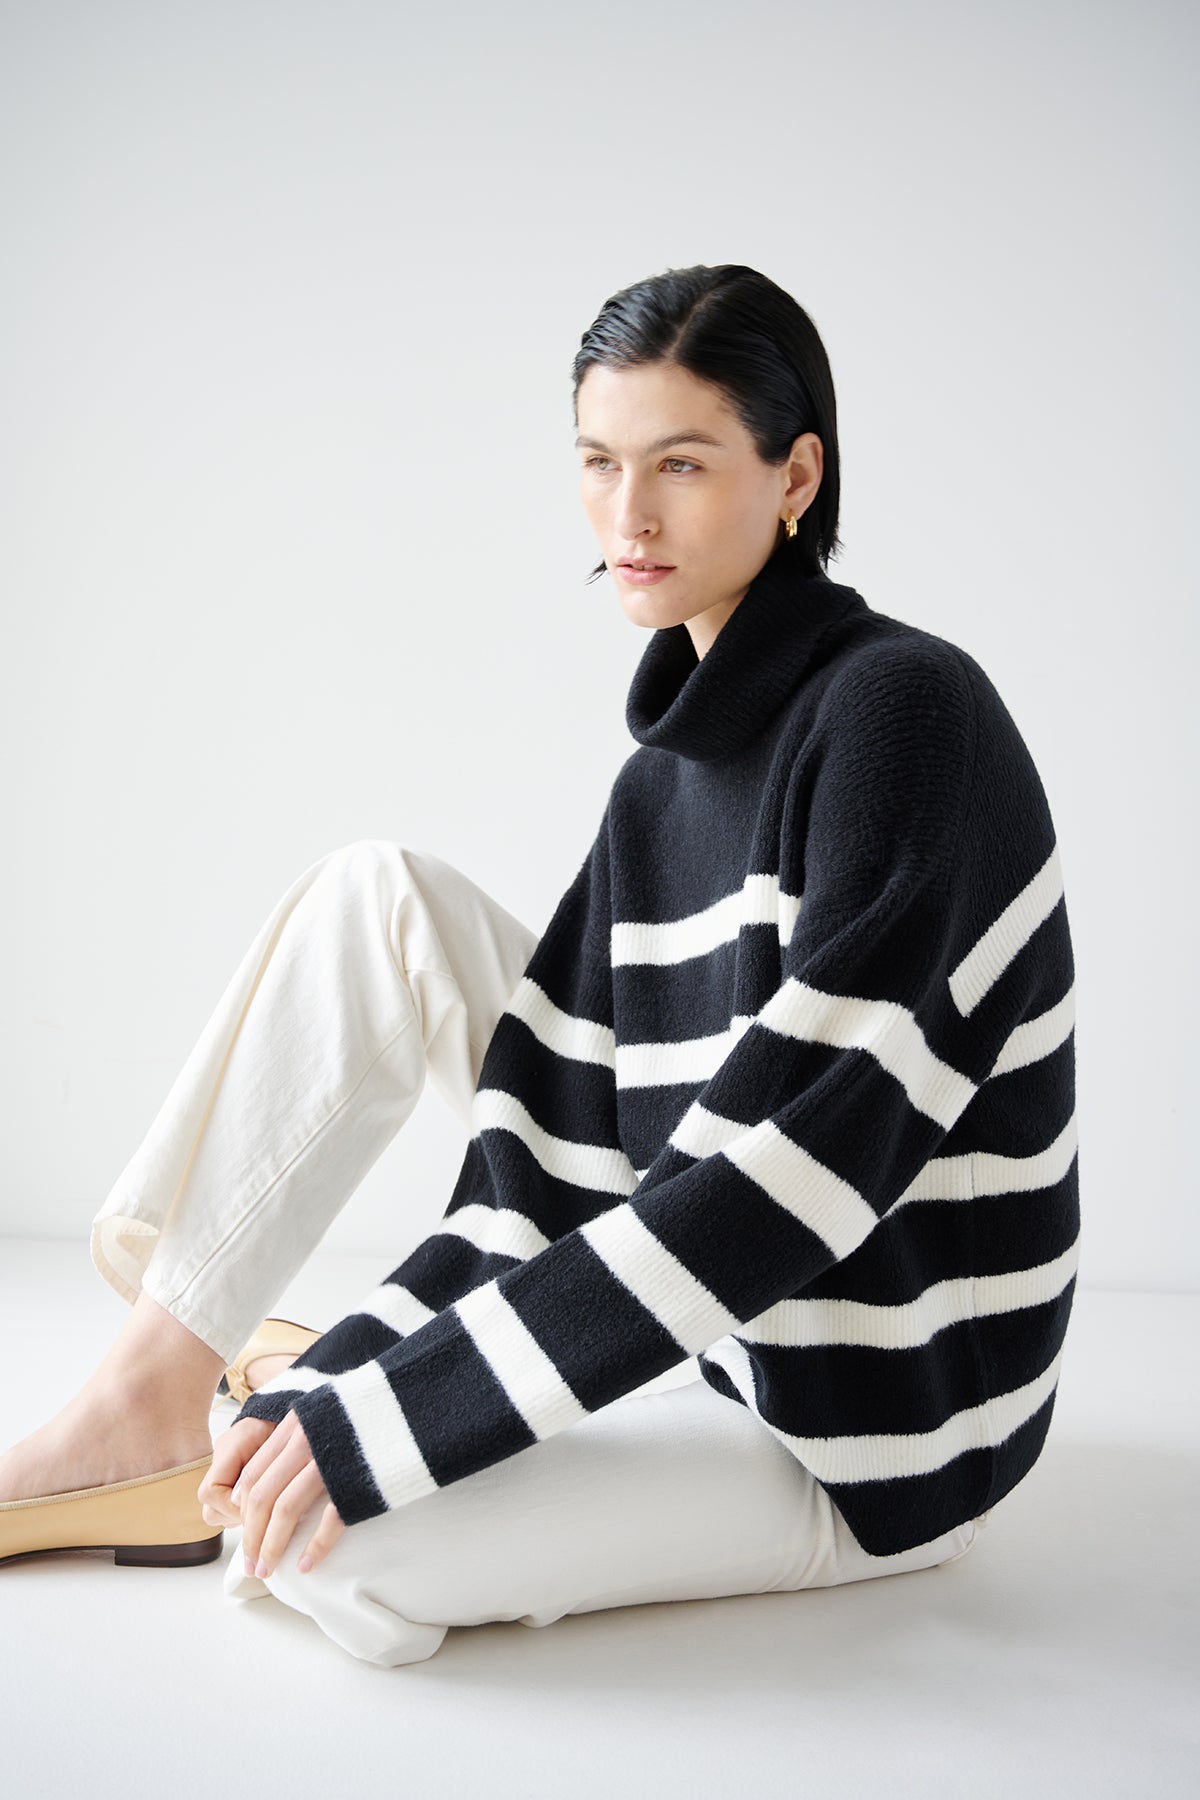   A model wearing the Velvet by Jenny Graham ENCINO sweater, an oversized black and white striped turtleneck sweater in a wool blend fabric. 